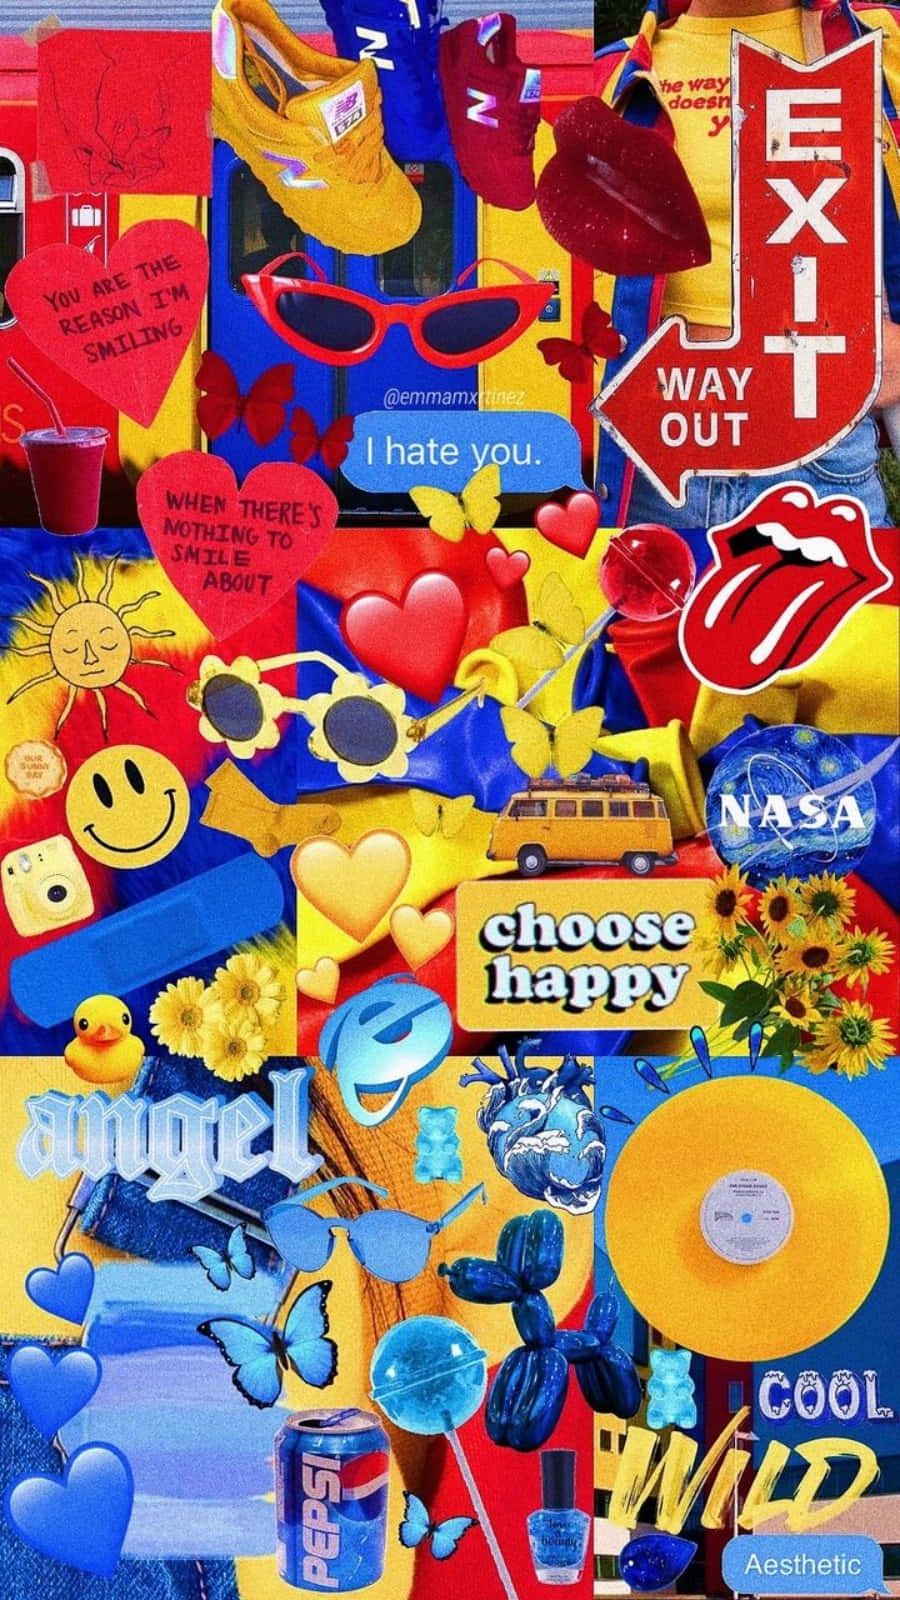 A collage of red, yellow, and blue images including a stop sign, a smiley face, a red lip print, a yellow rose, a blue butterfly, a bottle of Nasa, and a CD. - Colorful